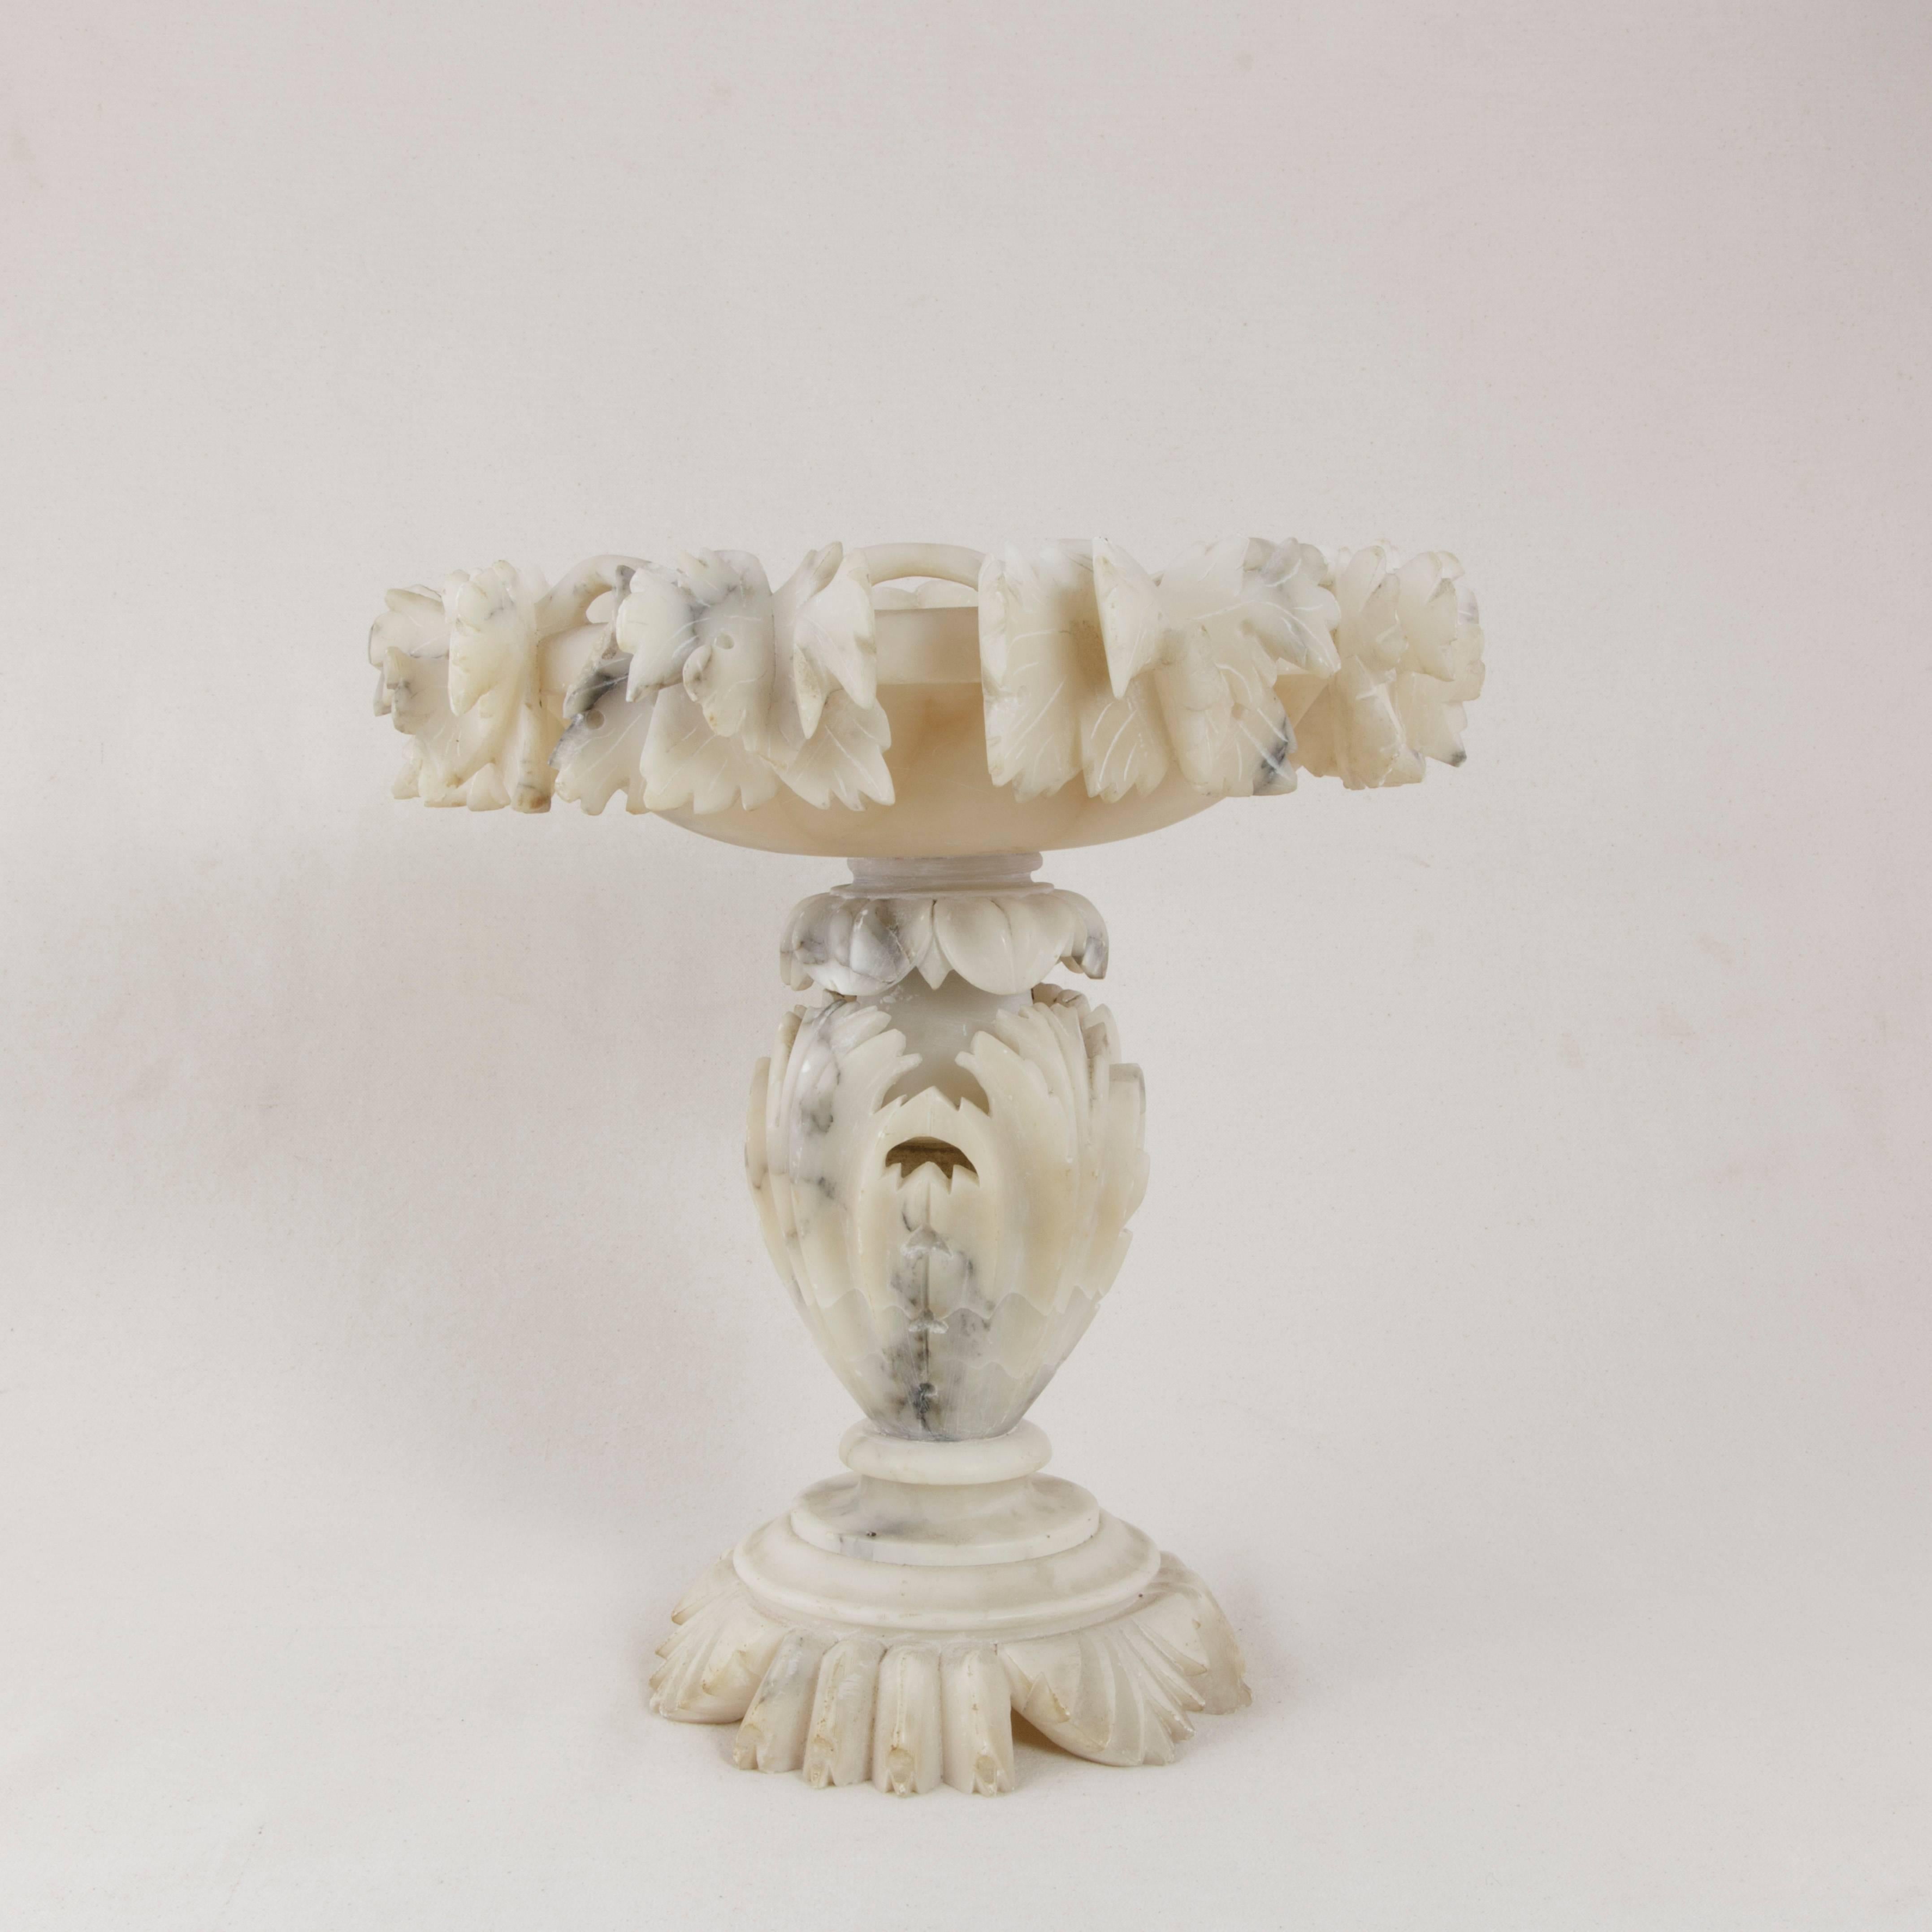 Early 20th Century Large French Hand-Carved Alabaster Compote Bowl, Dish with Grape Leaves